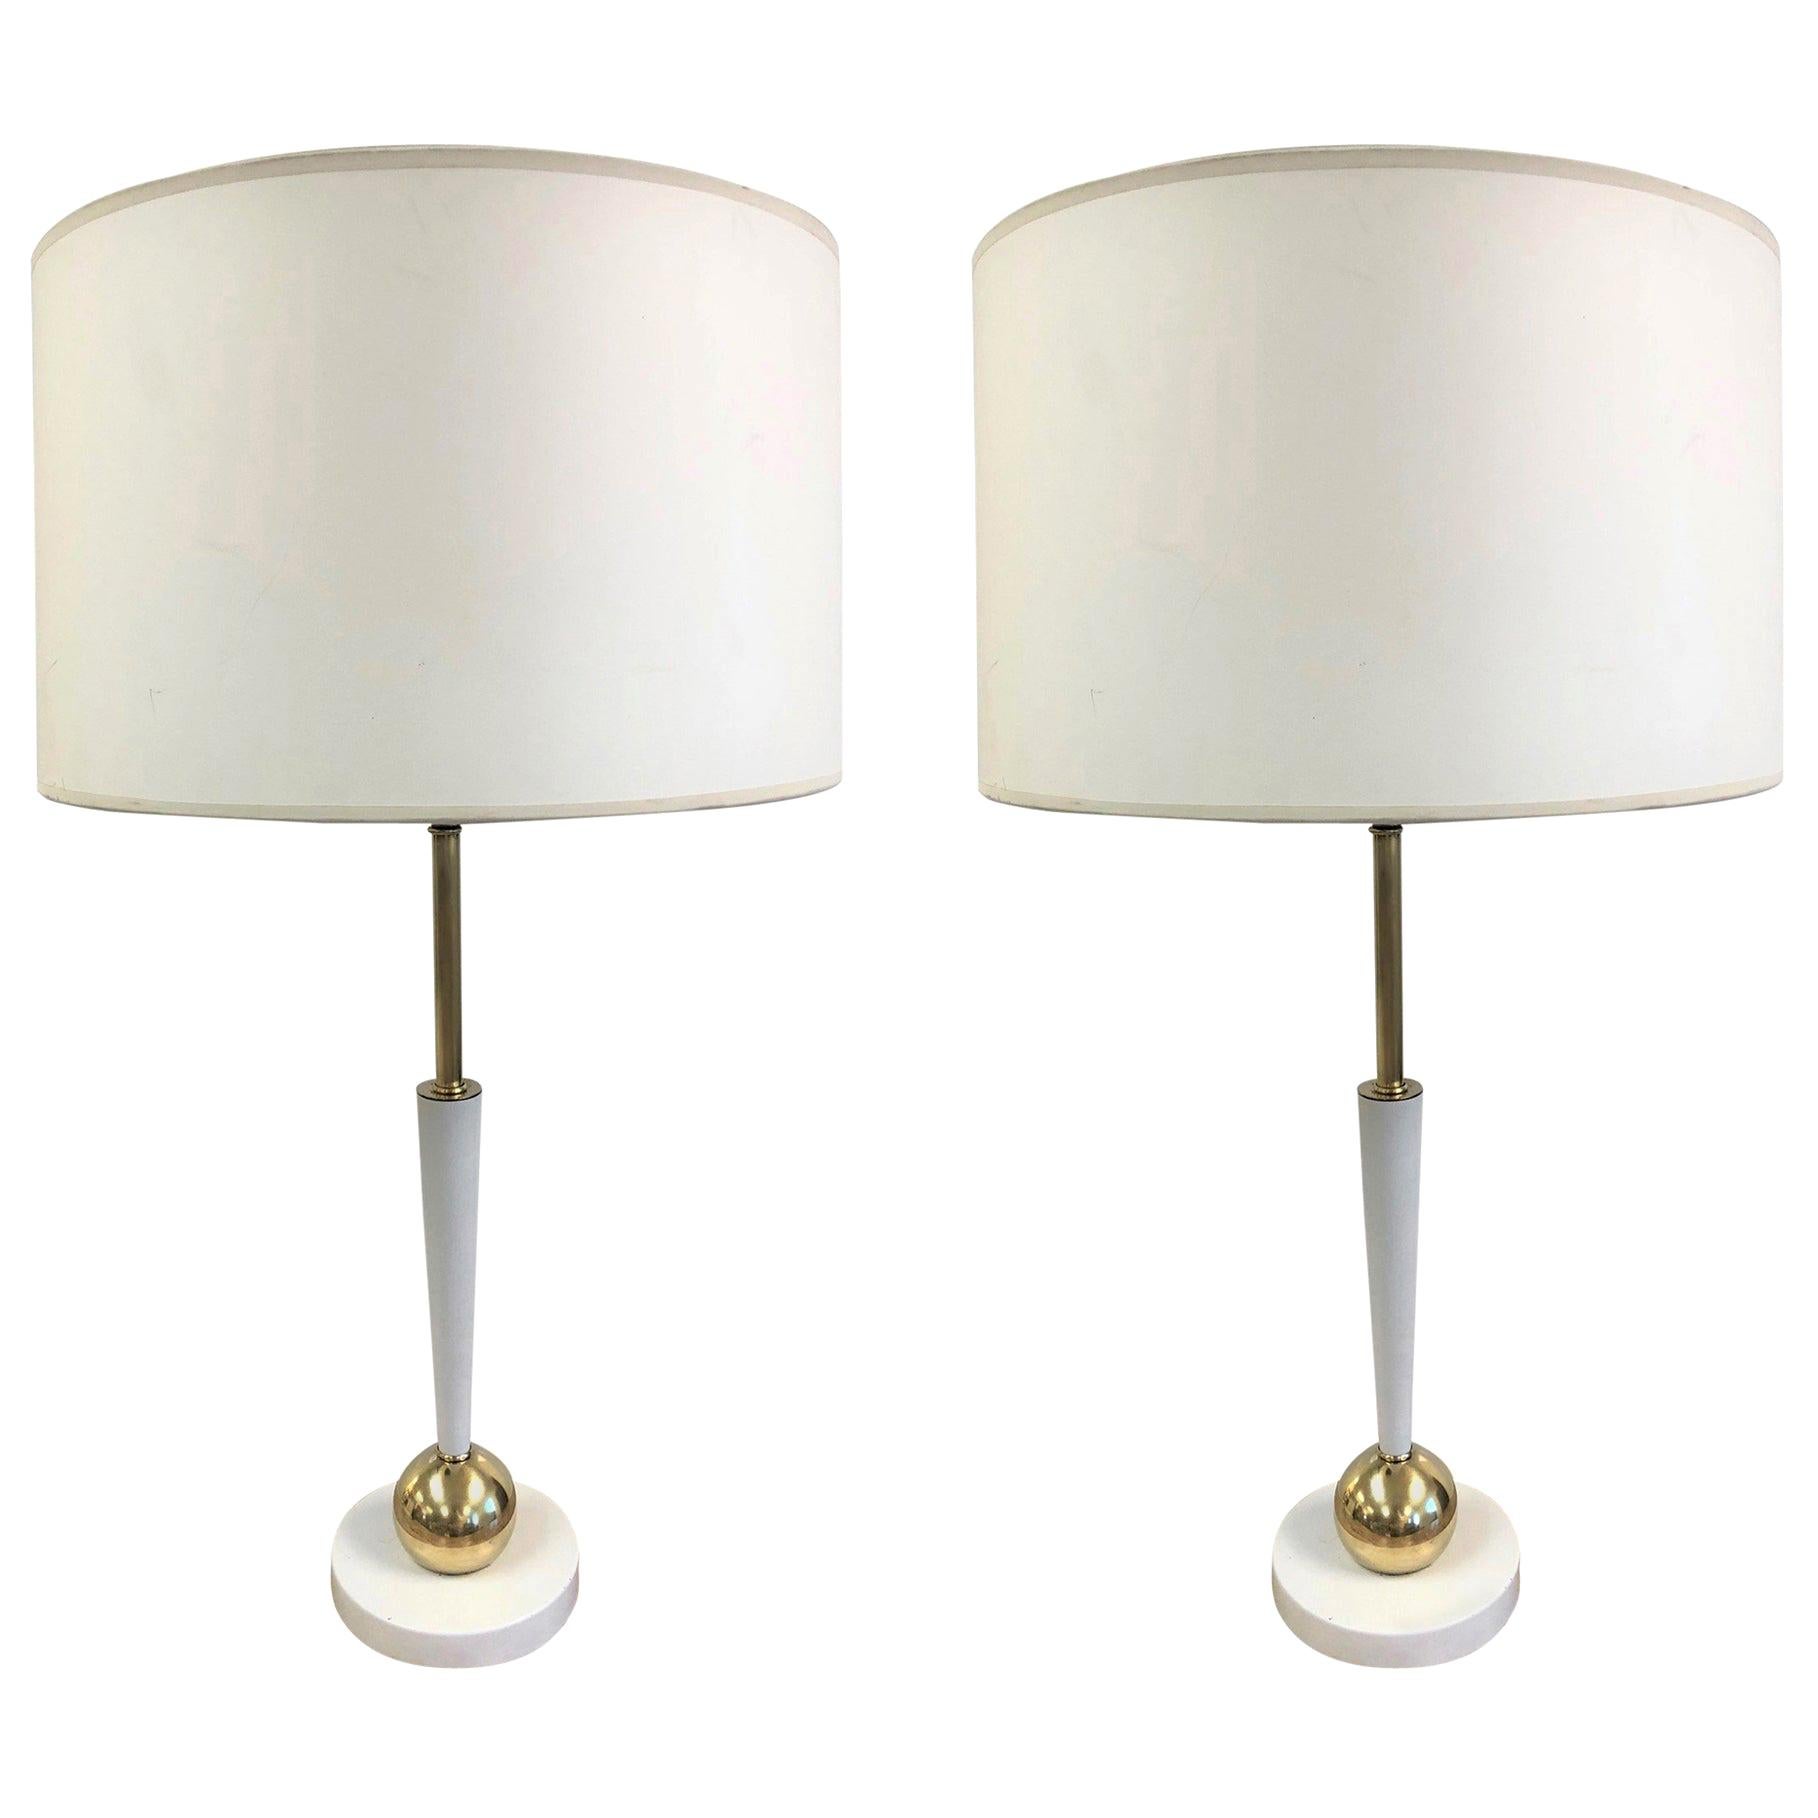 Pair of Mid-Century Modern Brass Ball Lamps For Sale